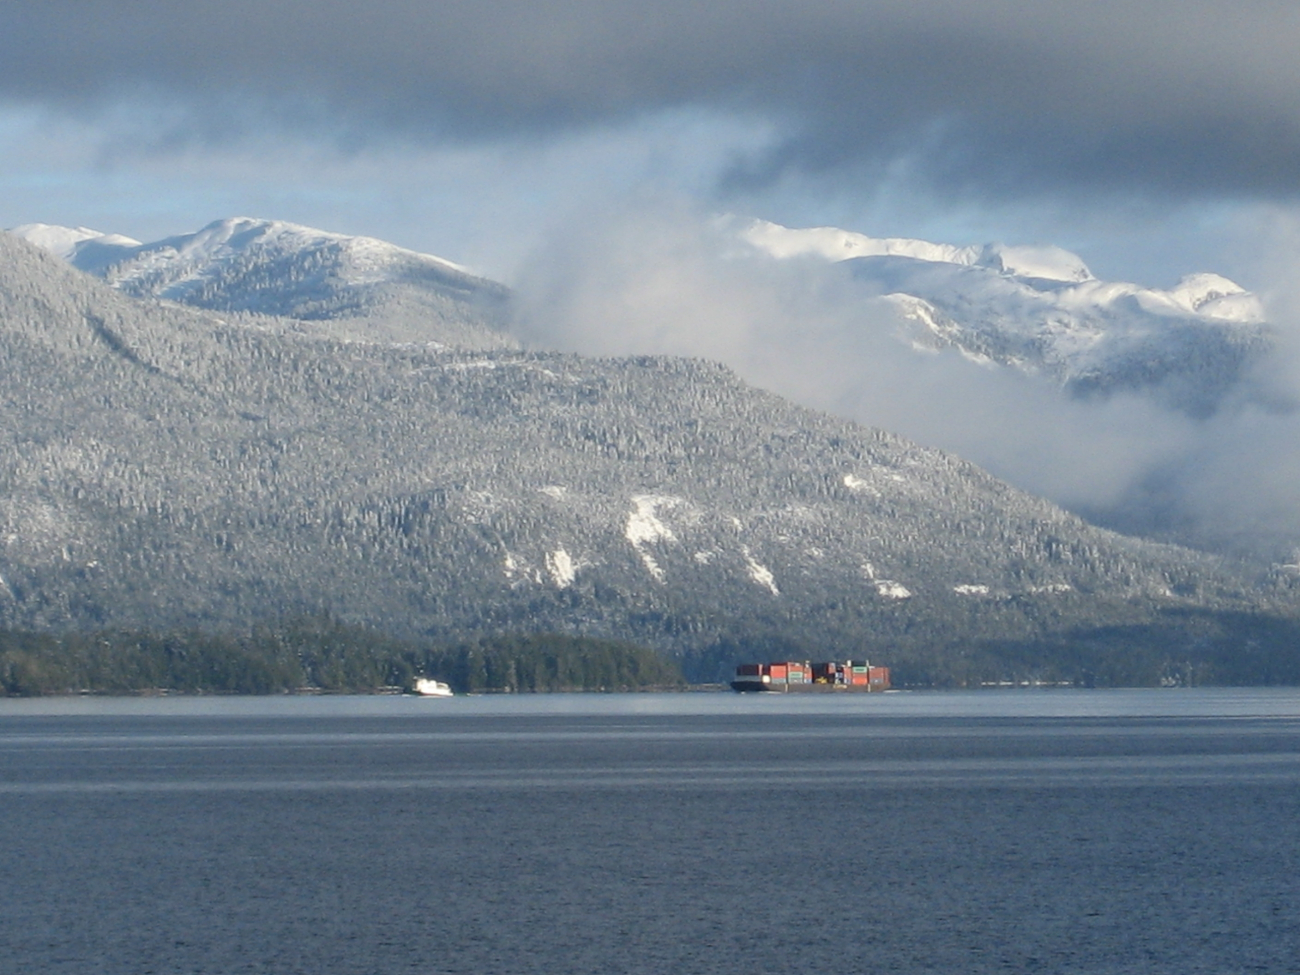 Tug and barge in the Inside Passage after a dusting of snow on the mountains